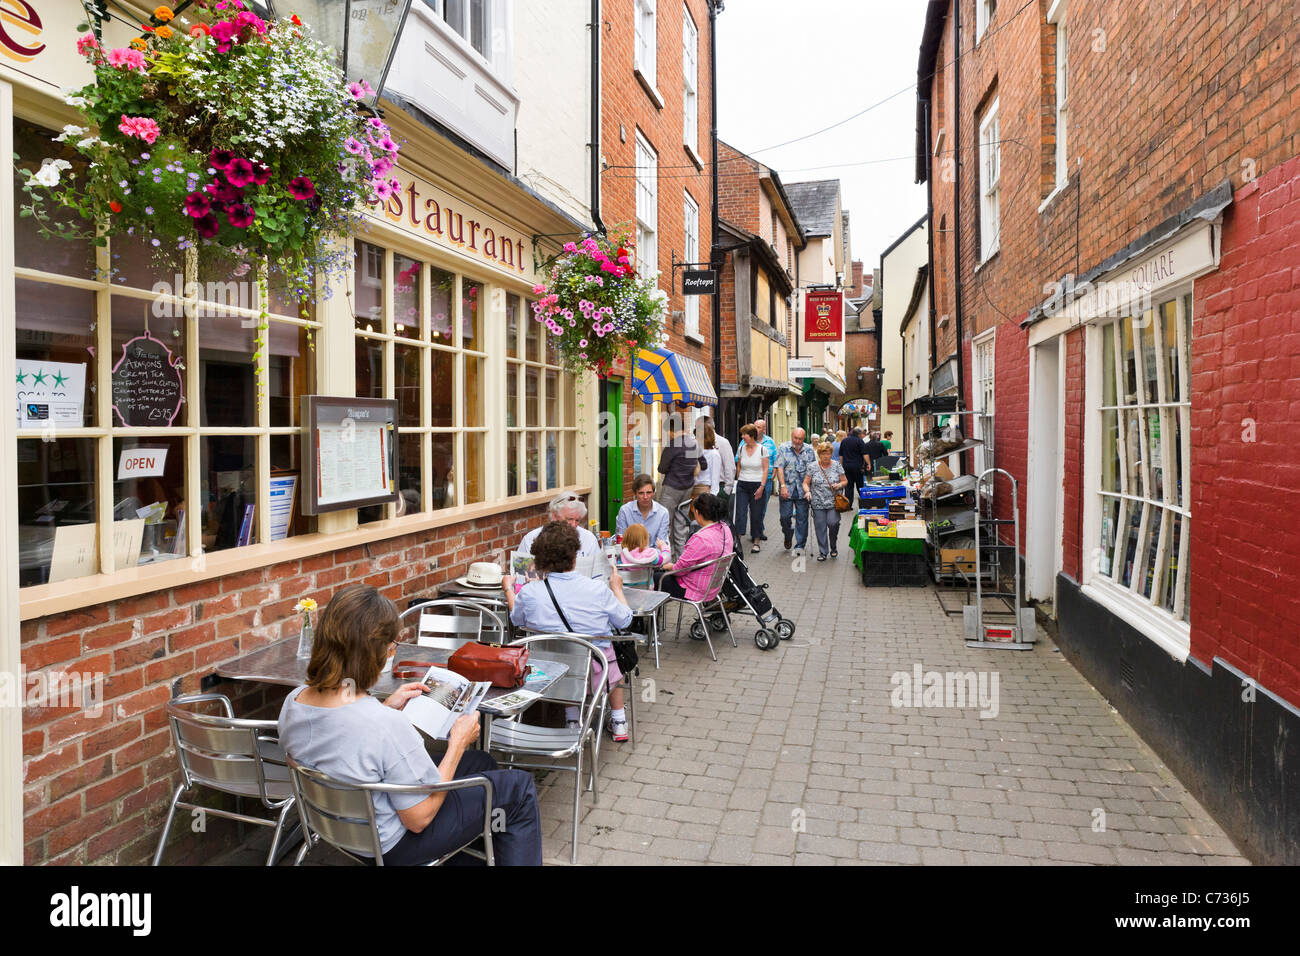 Sidestreet cafe in the centre of the old town, Ludlow, Shropshire, England, UK Stock Photo